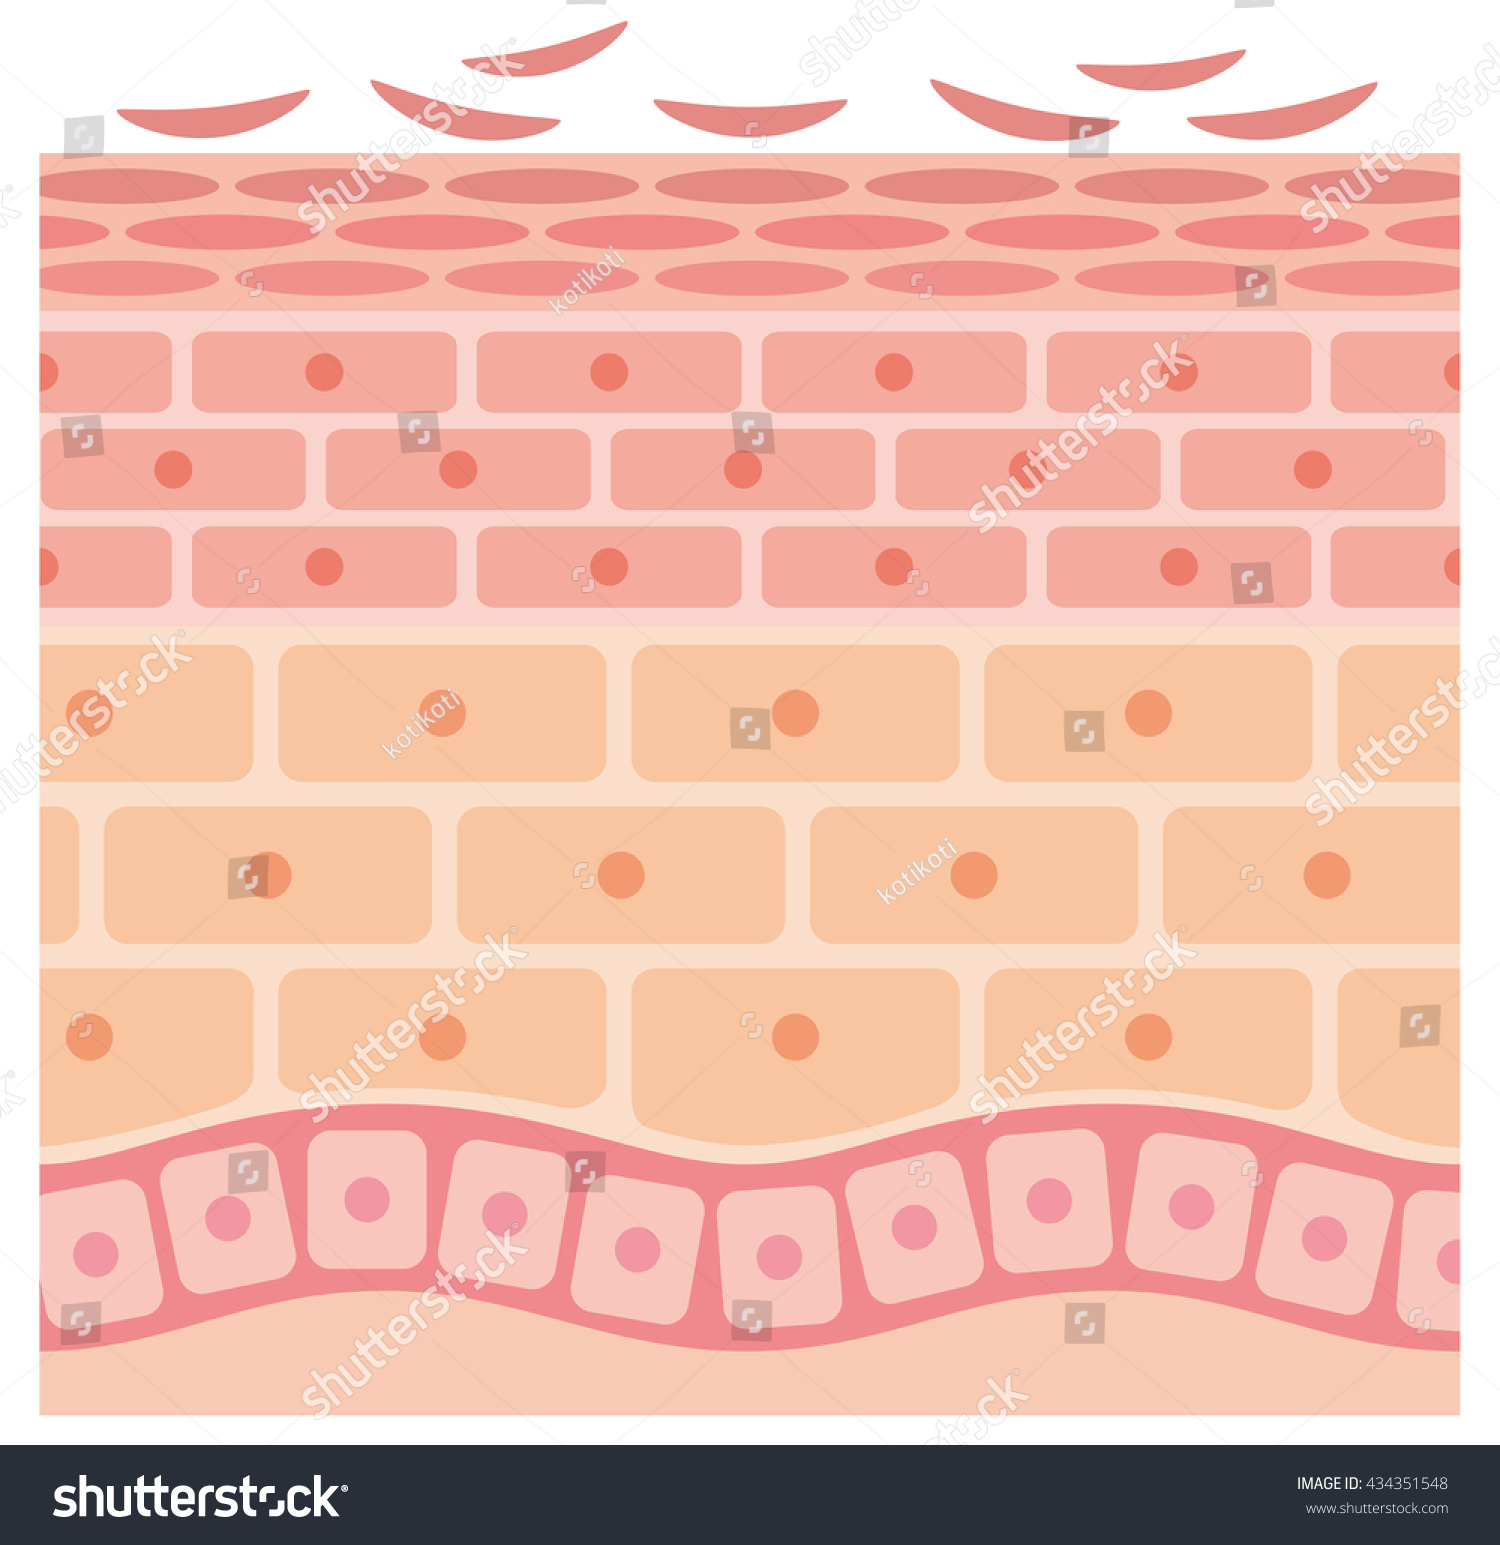 Sectional View Epithelium Skin Cells Stock Illustration 434351548 ...